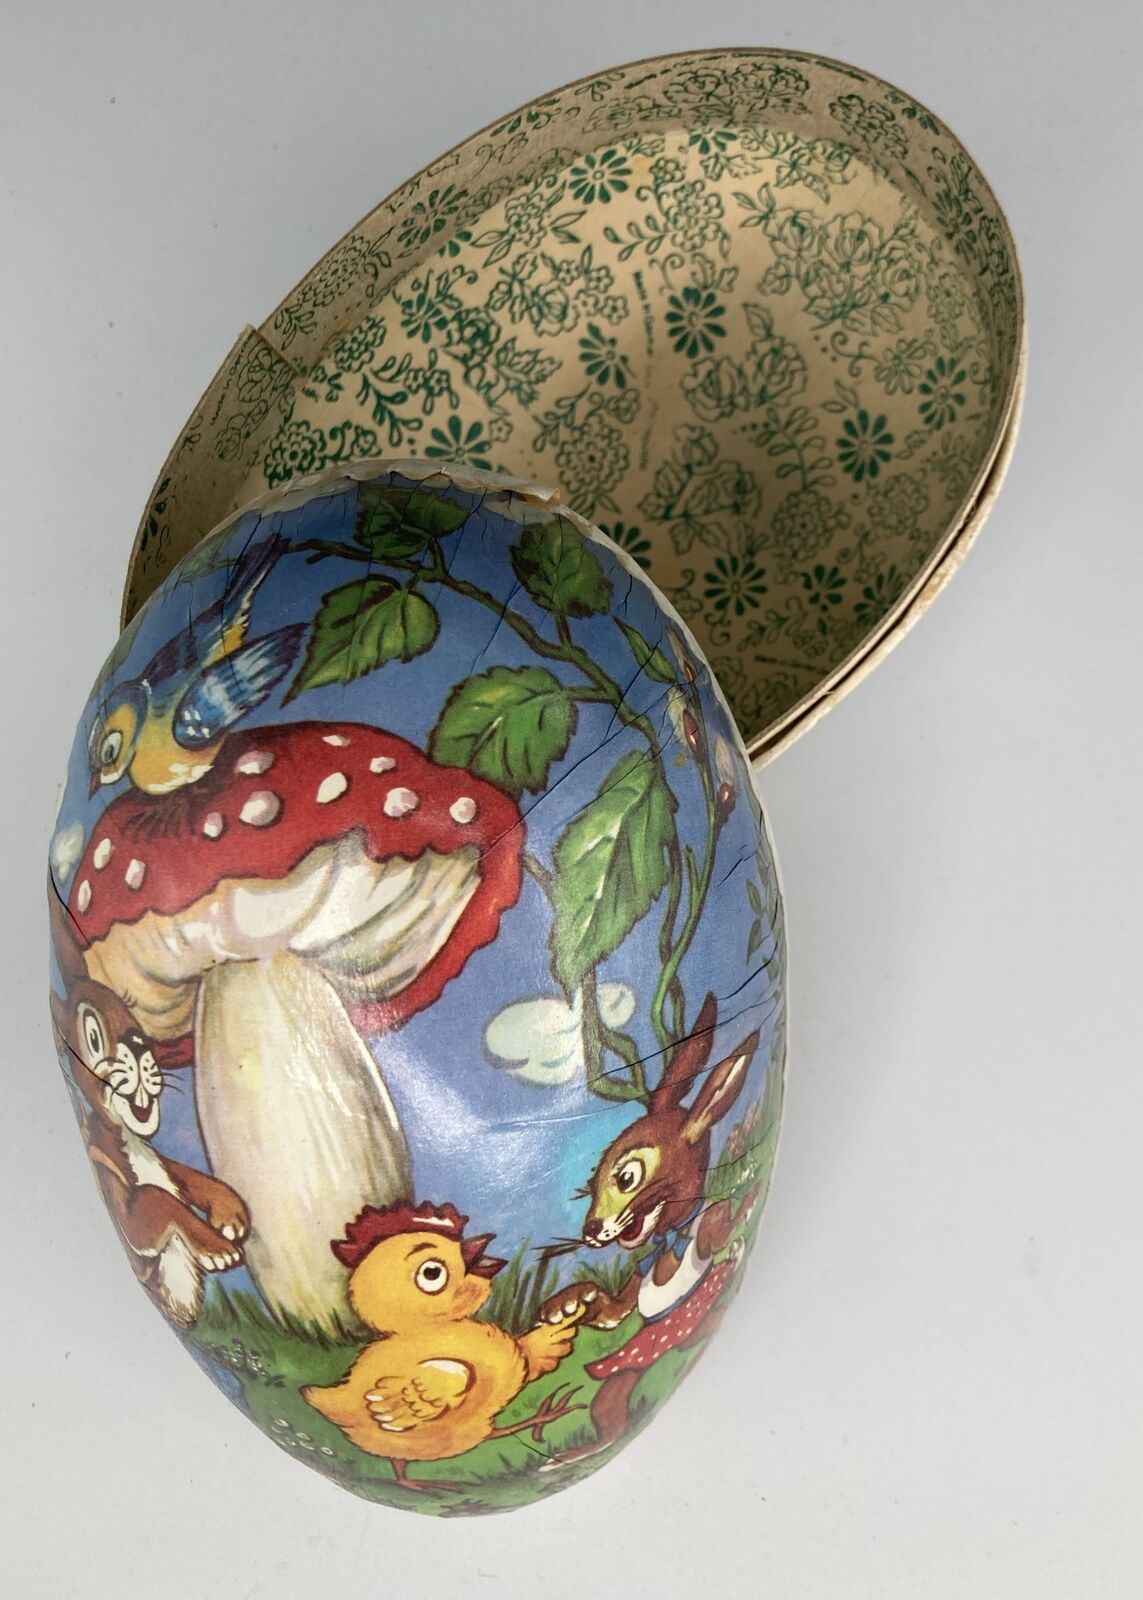 VTG German Democratic Republic Paper Mache Easter Egg Candy Container